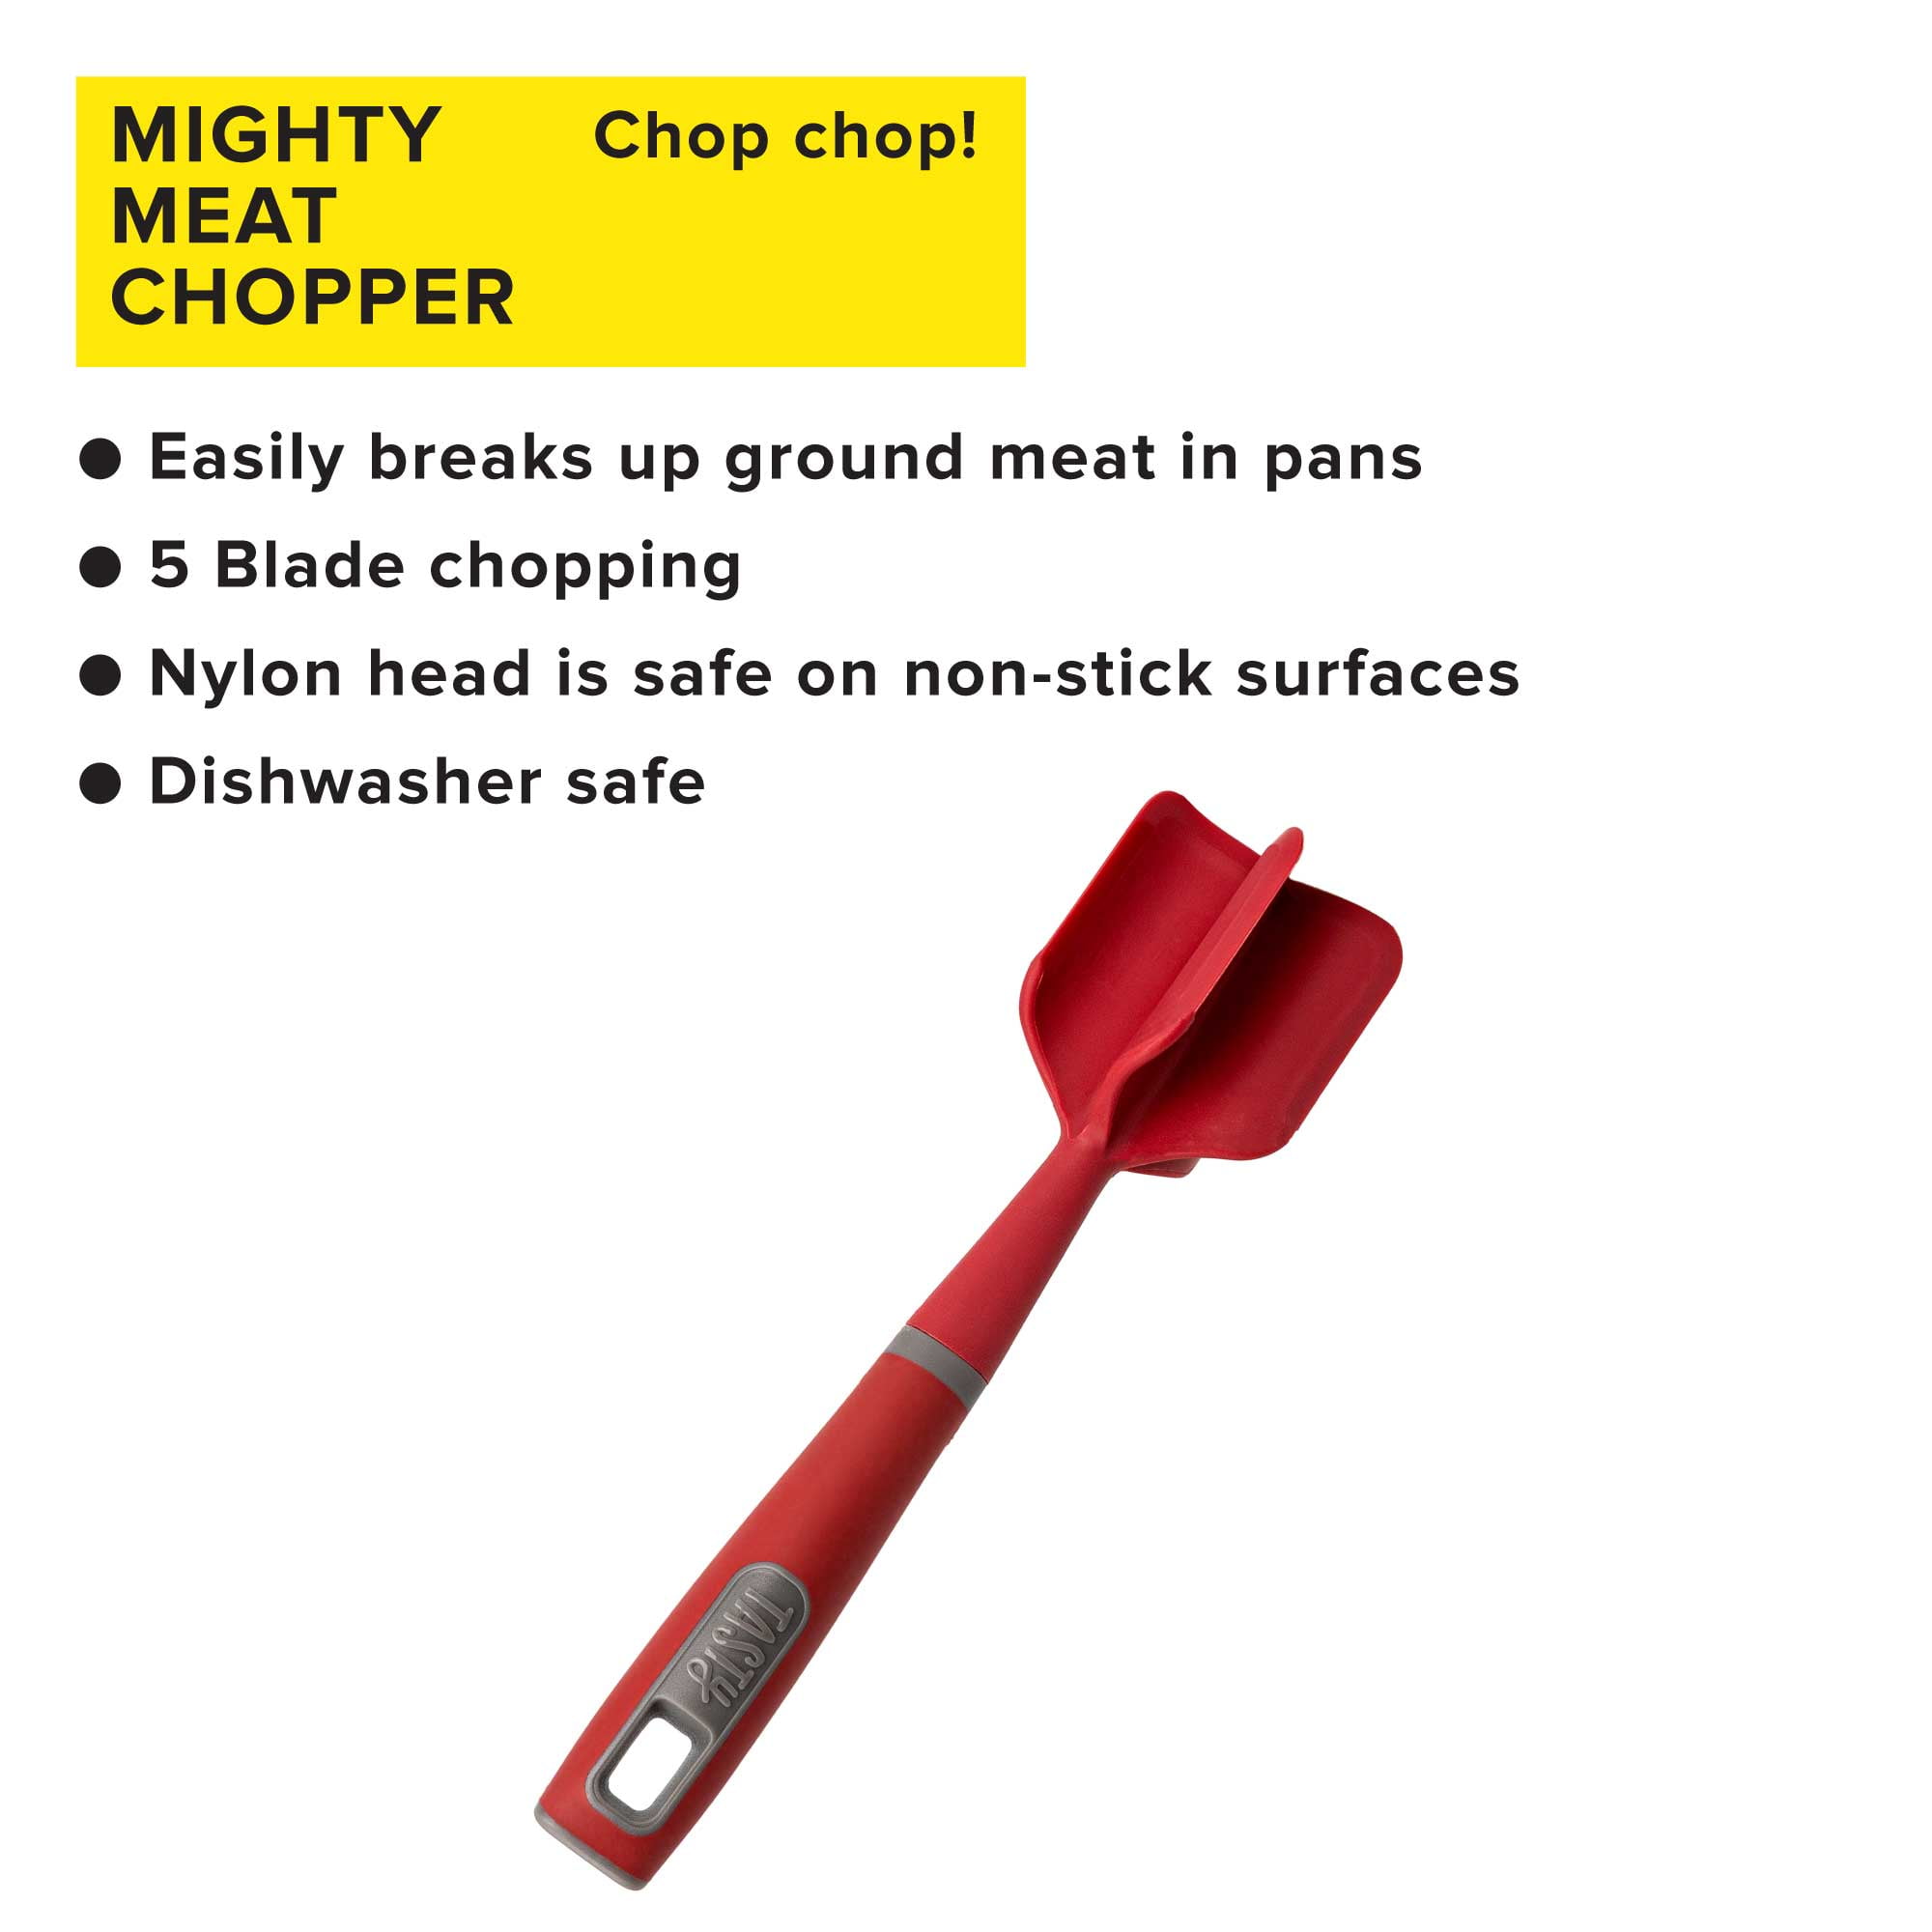  XSpecial Meat Chopper for Ground Beef - Hamburger